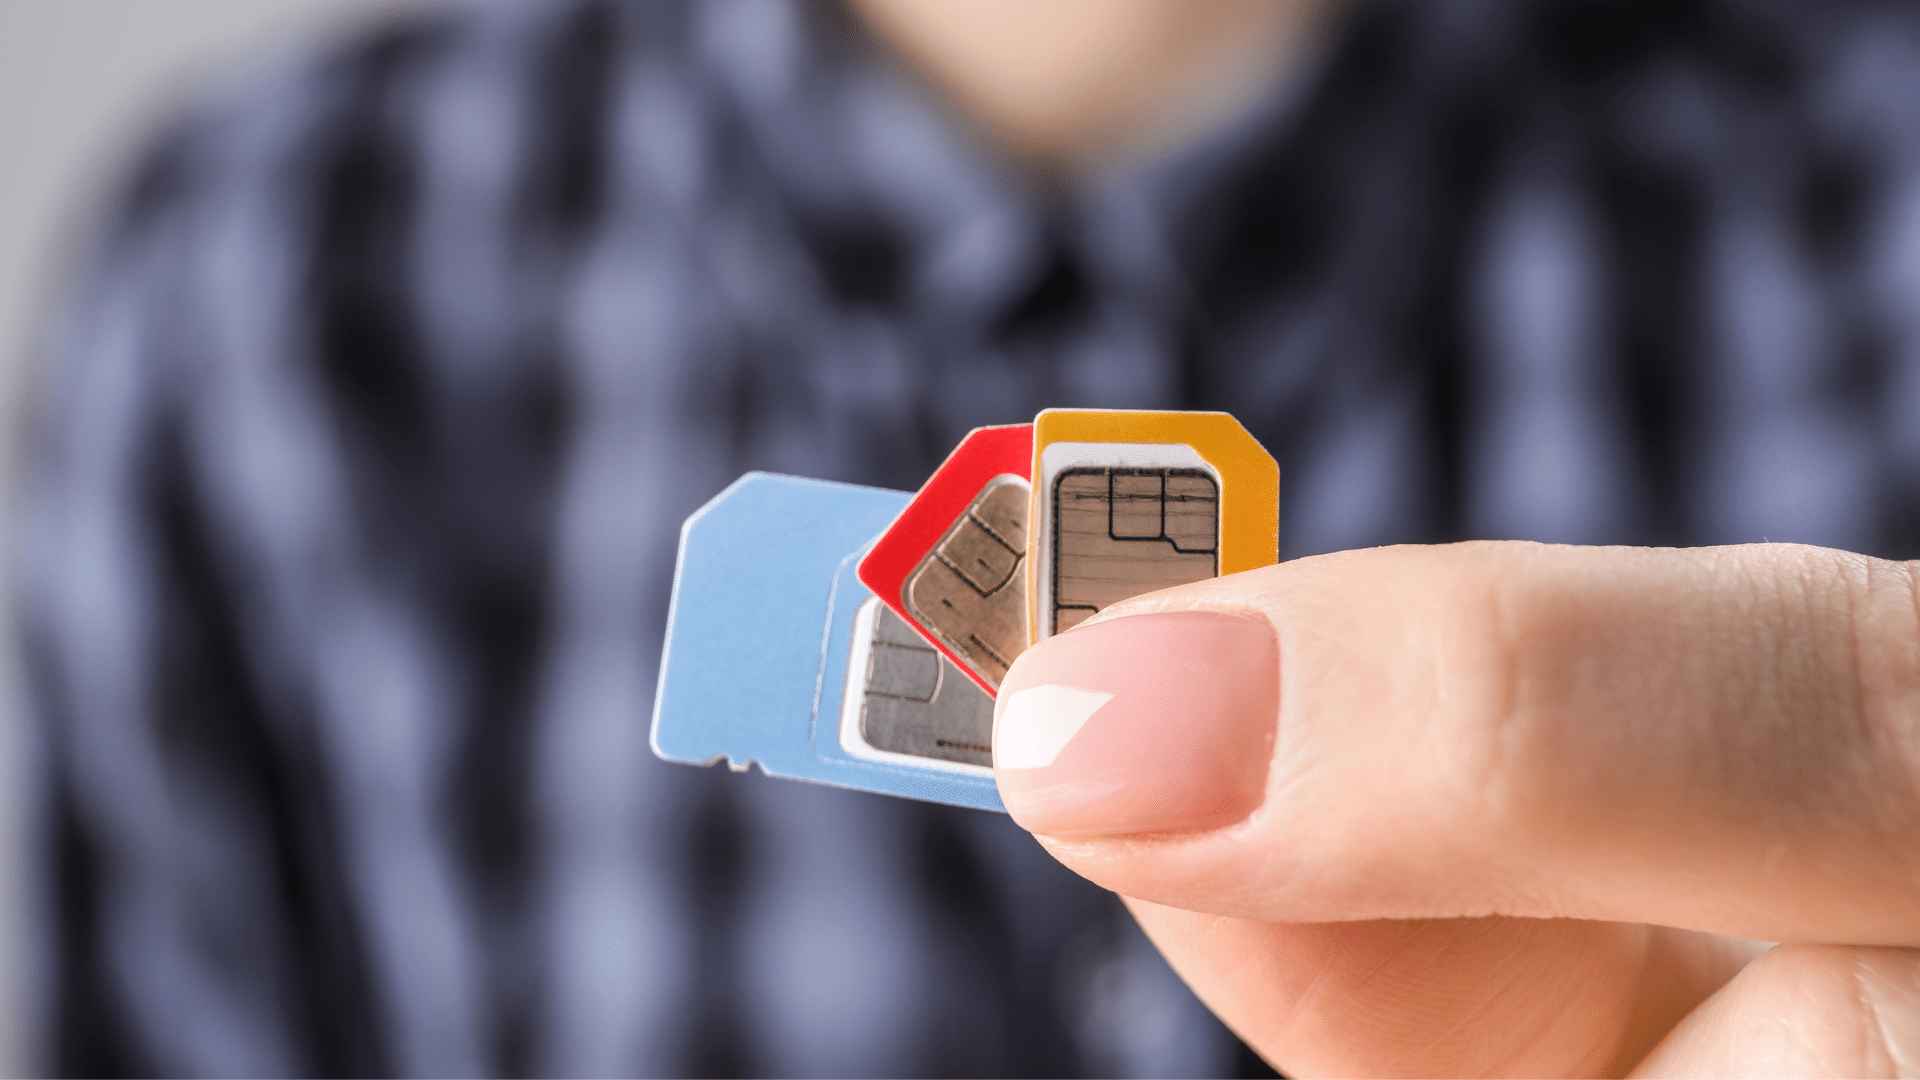 Finding Your SIM Card Number: A Quick Guide